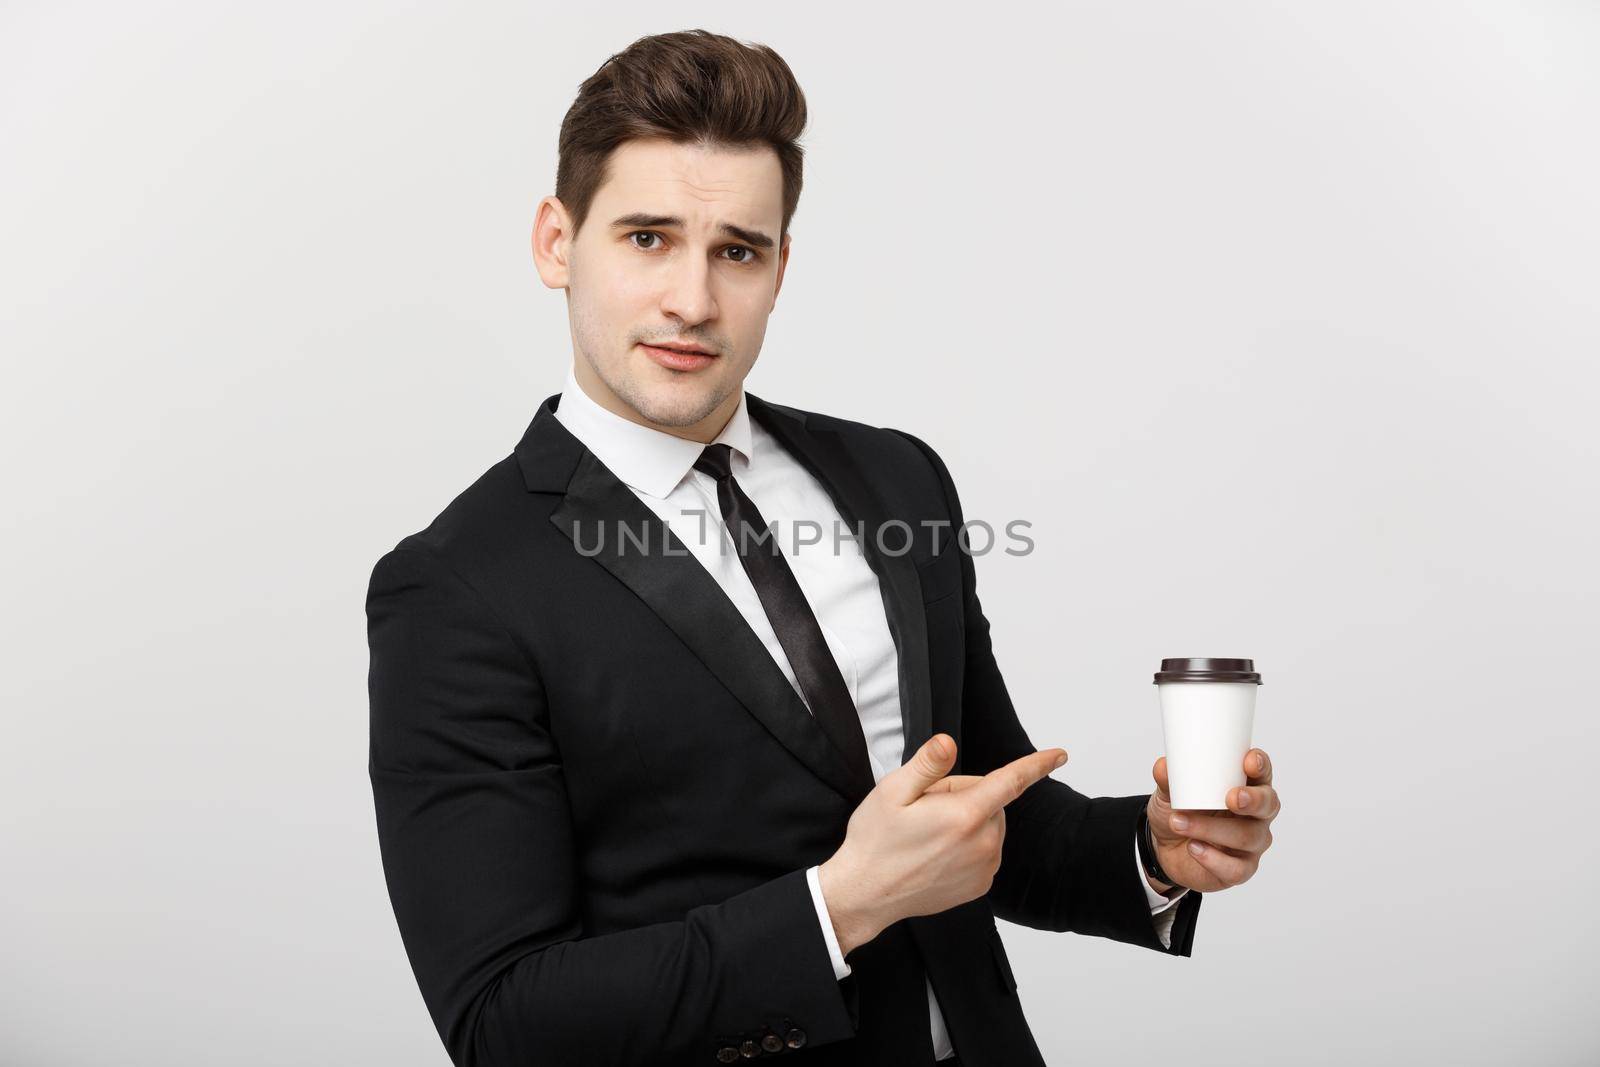 Business Concept: Half-length shot of handsome businessman in a suit holding a cup of coffee and pointing at it with his finger.